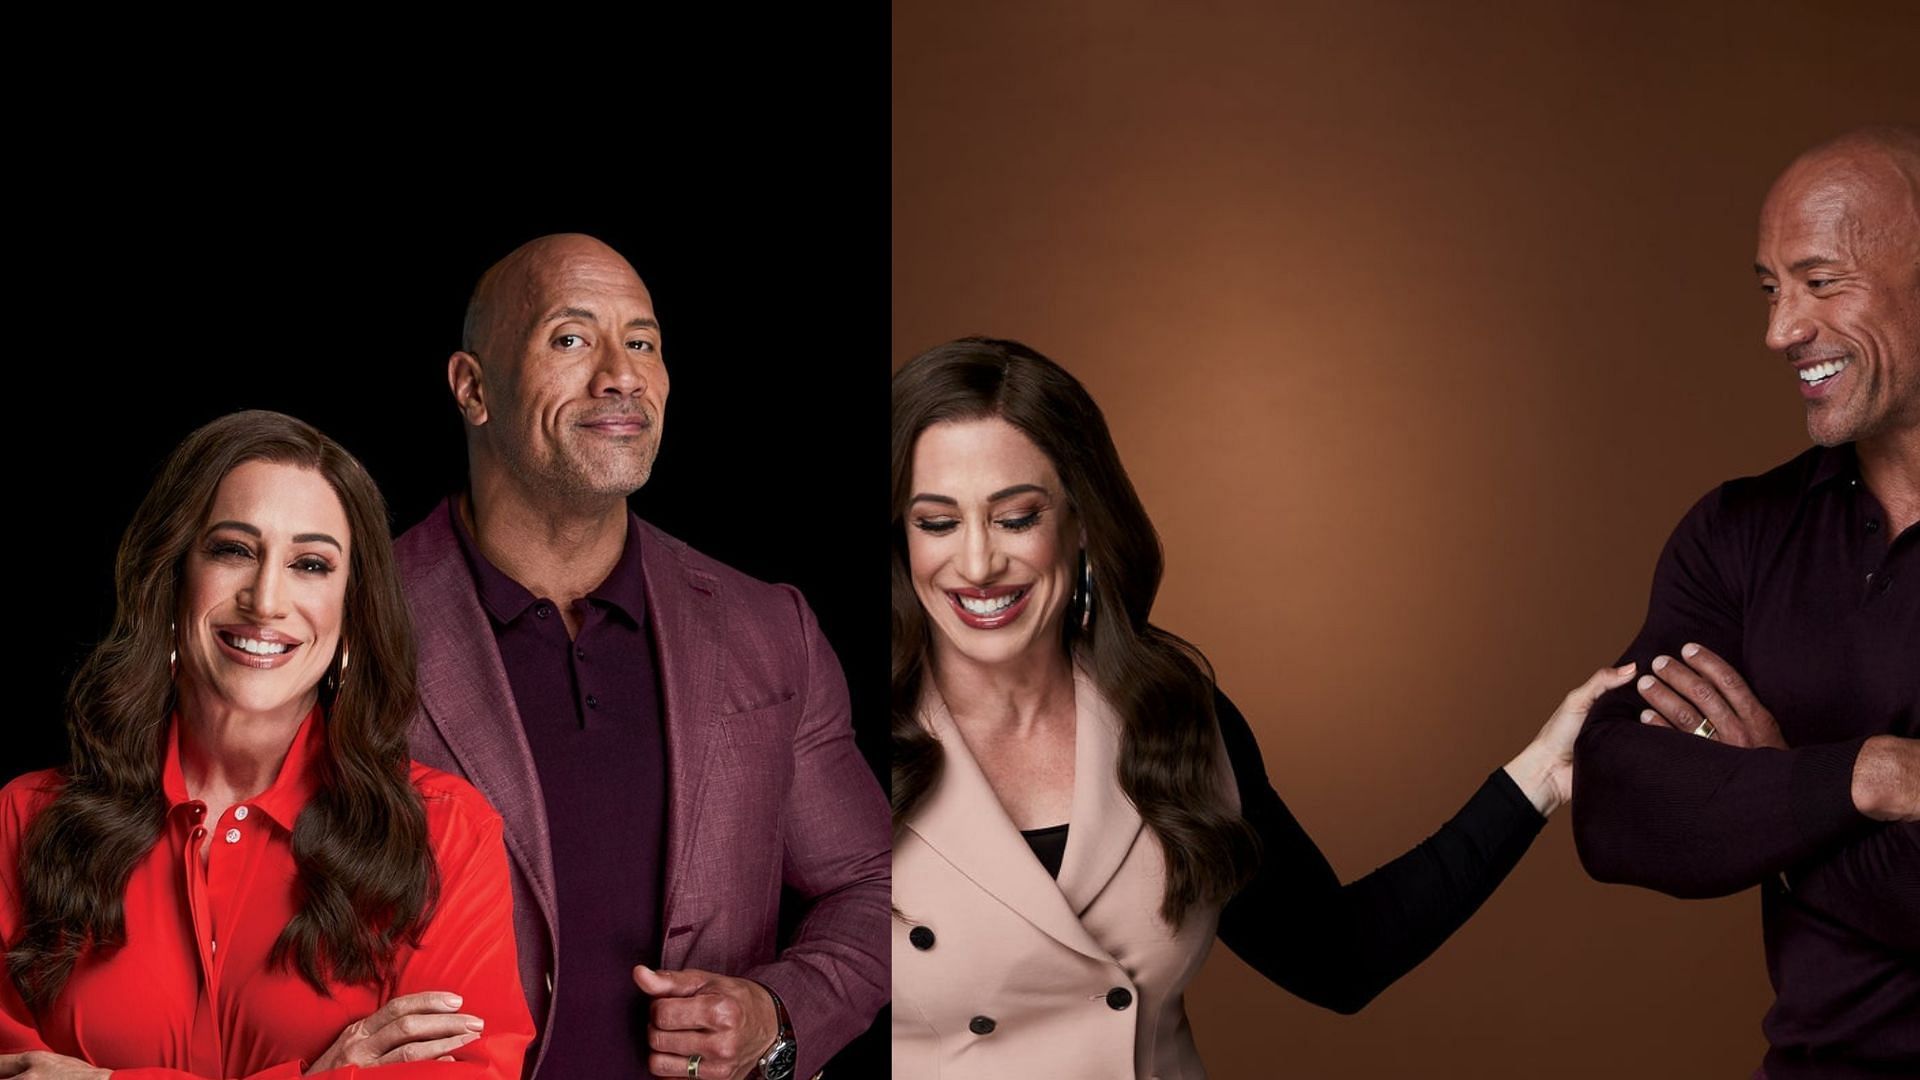 Hollywood actor Dwayne Johnson and businesswoman Dany Garcia